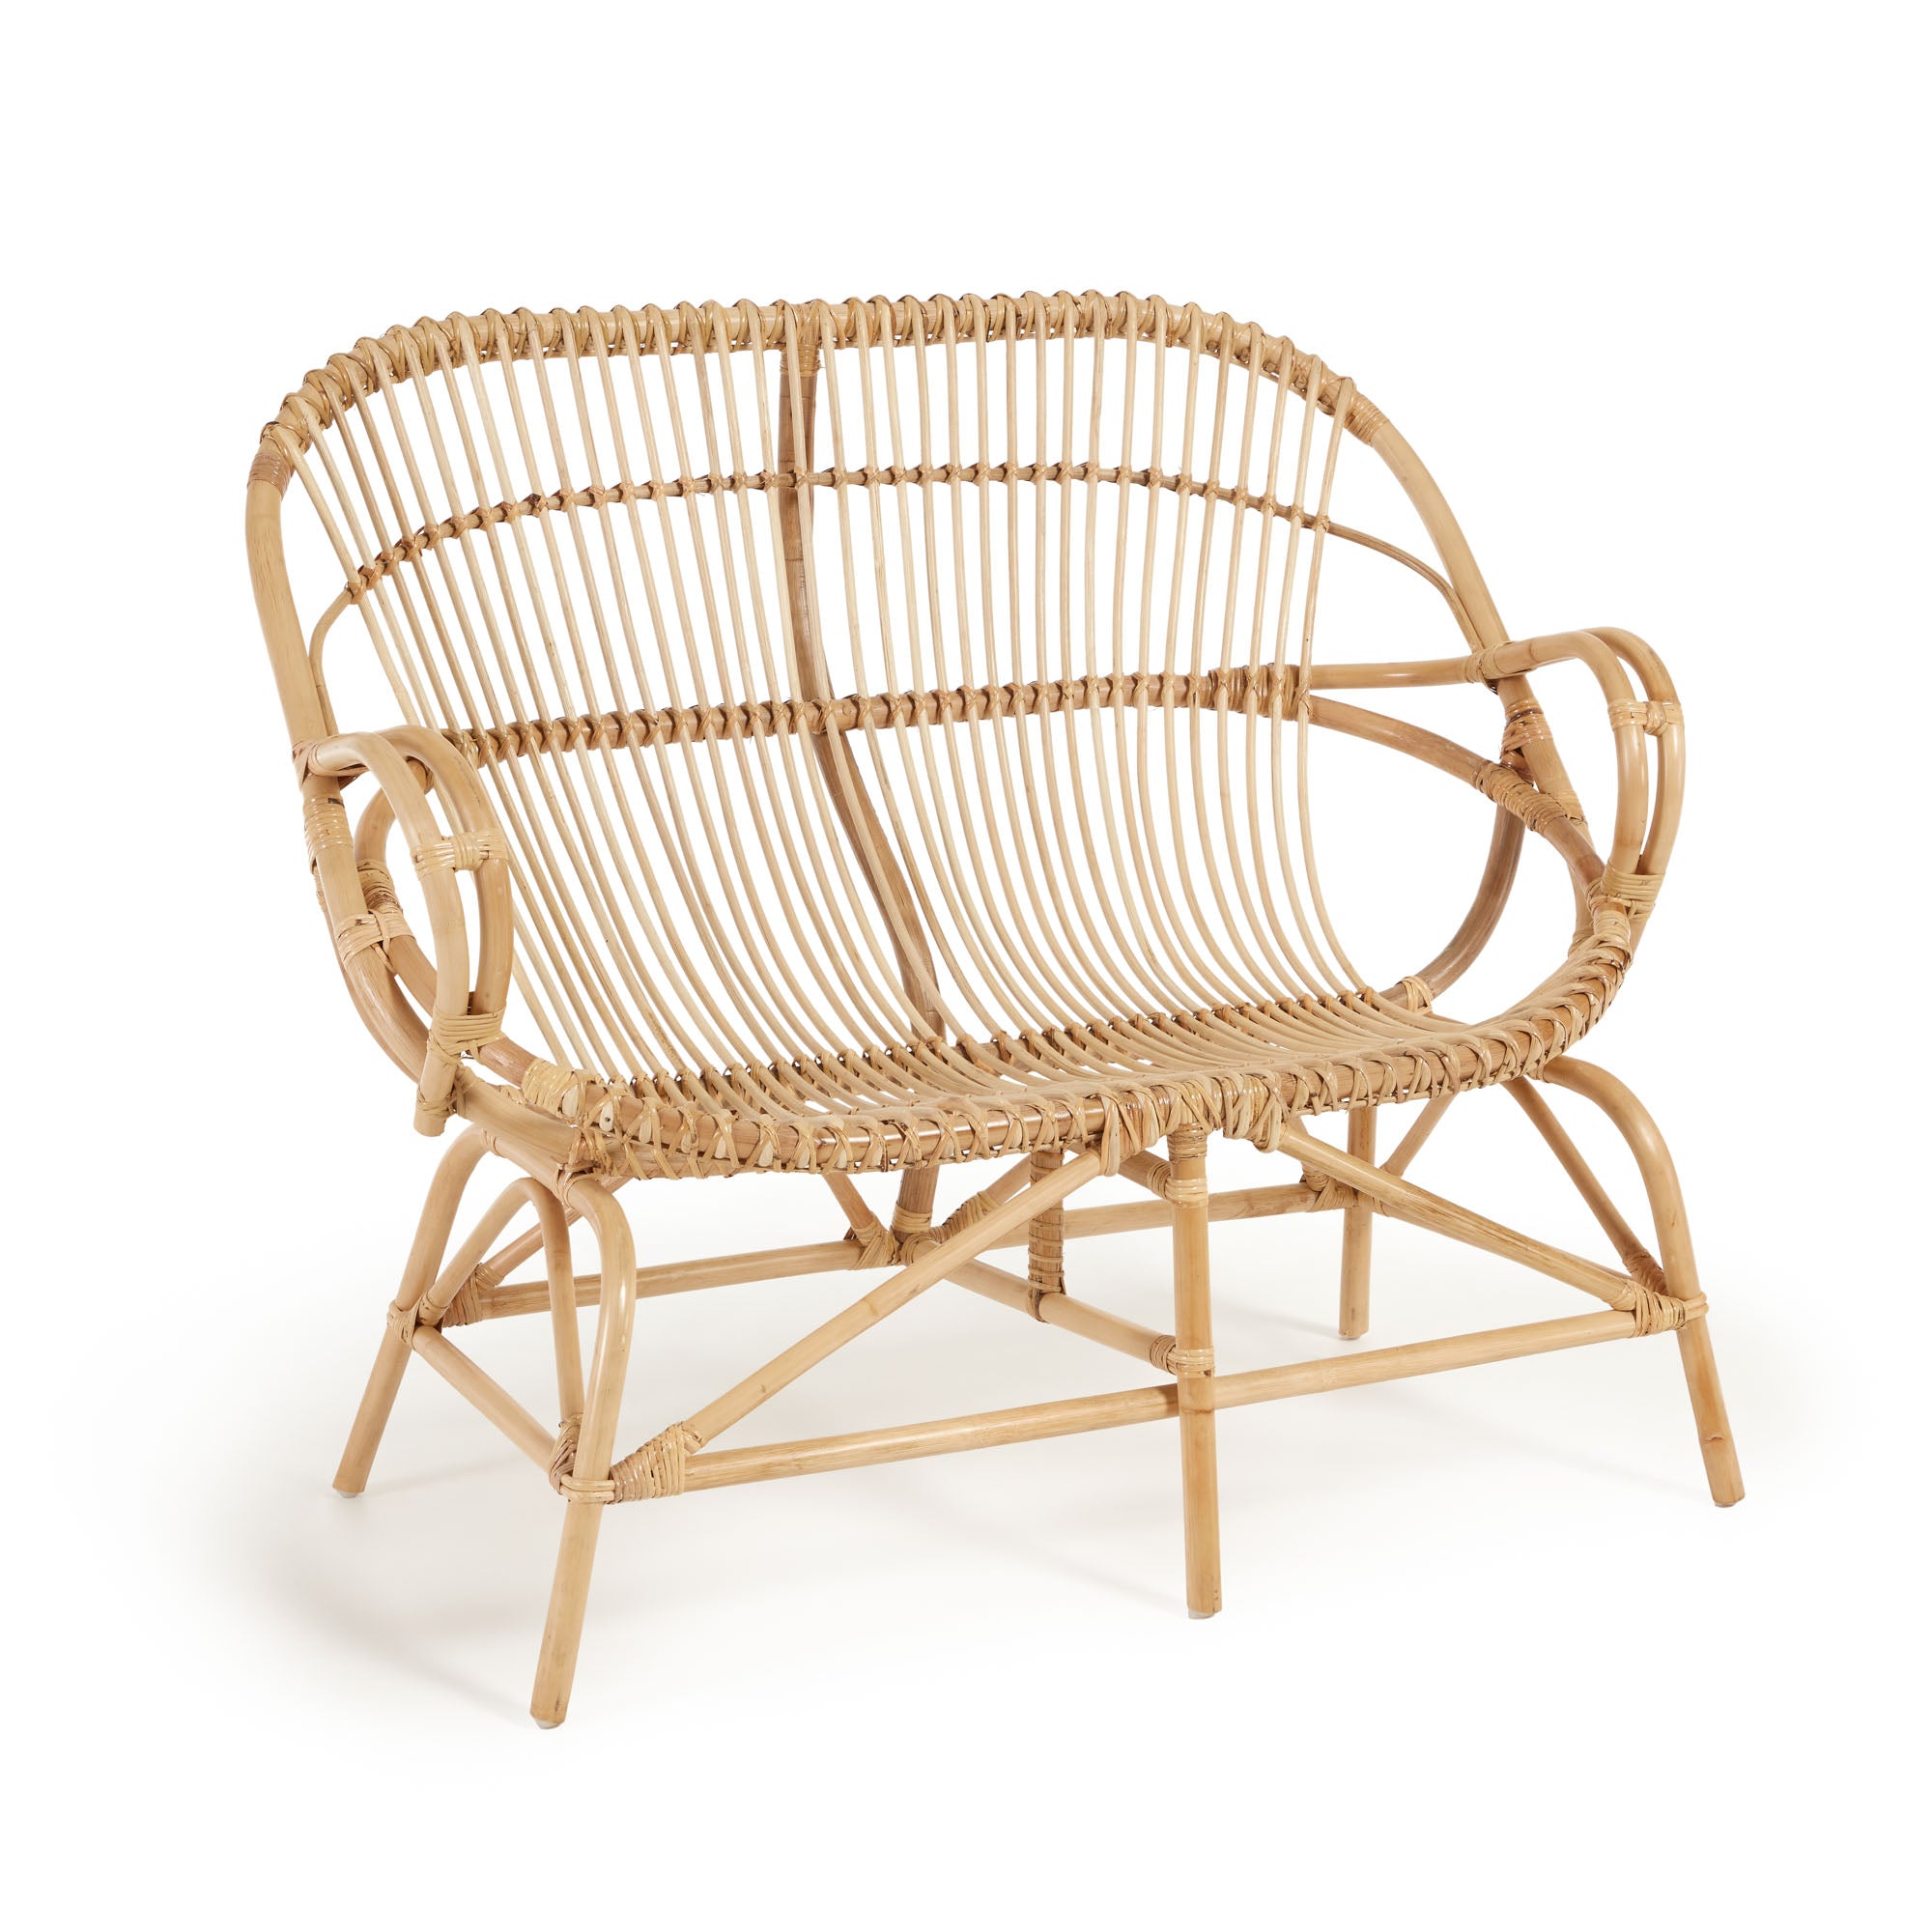 Mimosa rattan bench with a natural finish, 114 cm